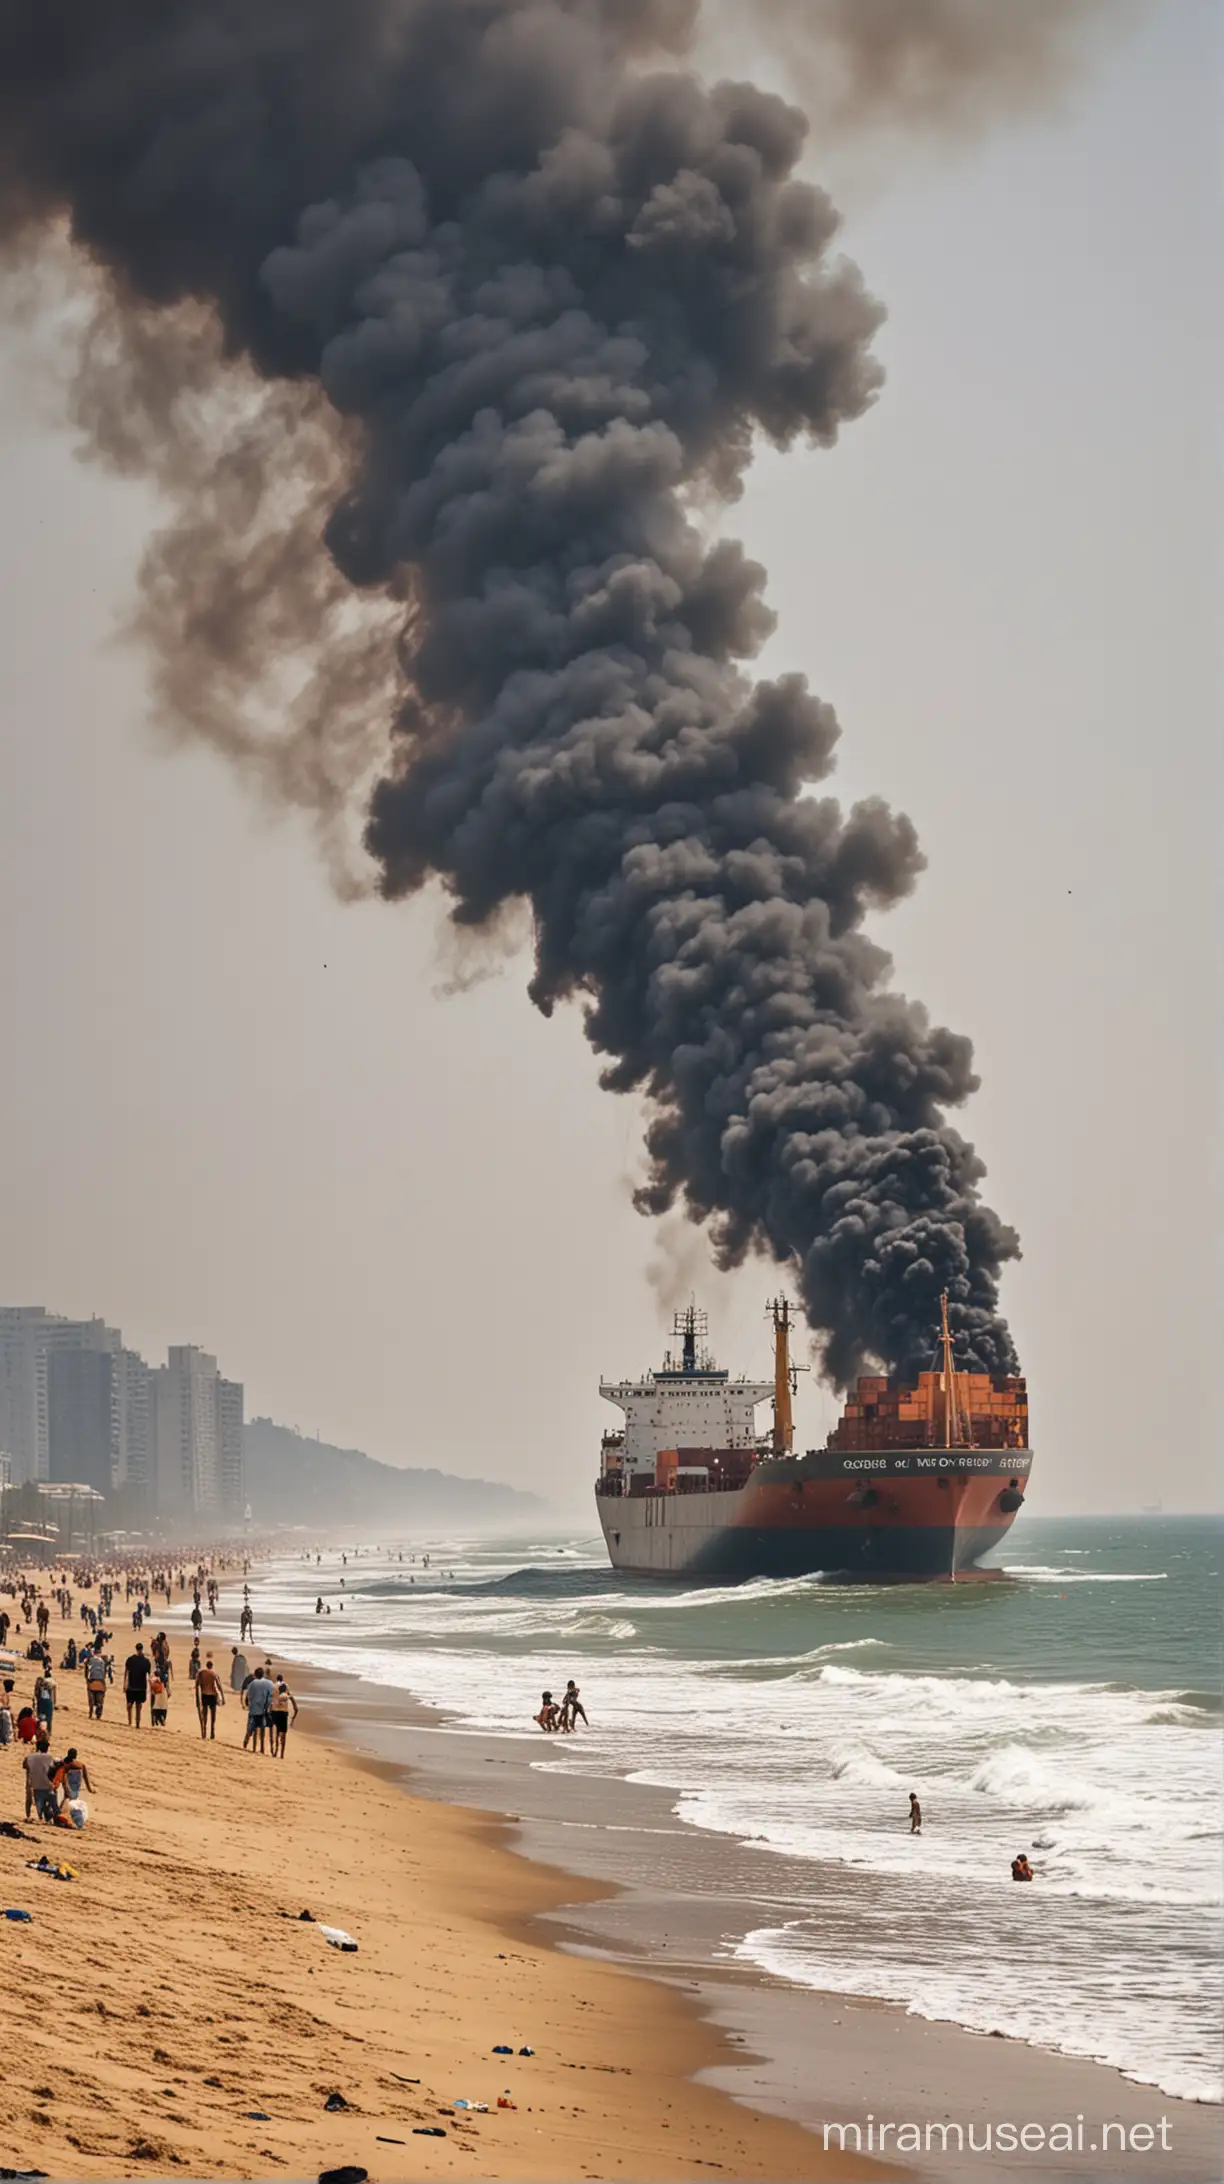 cargo ship,smoke ,strand at the beach,seen was many people